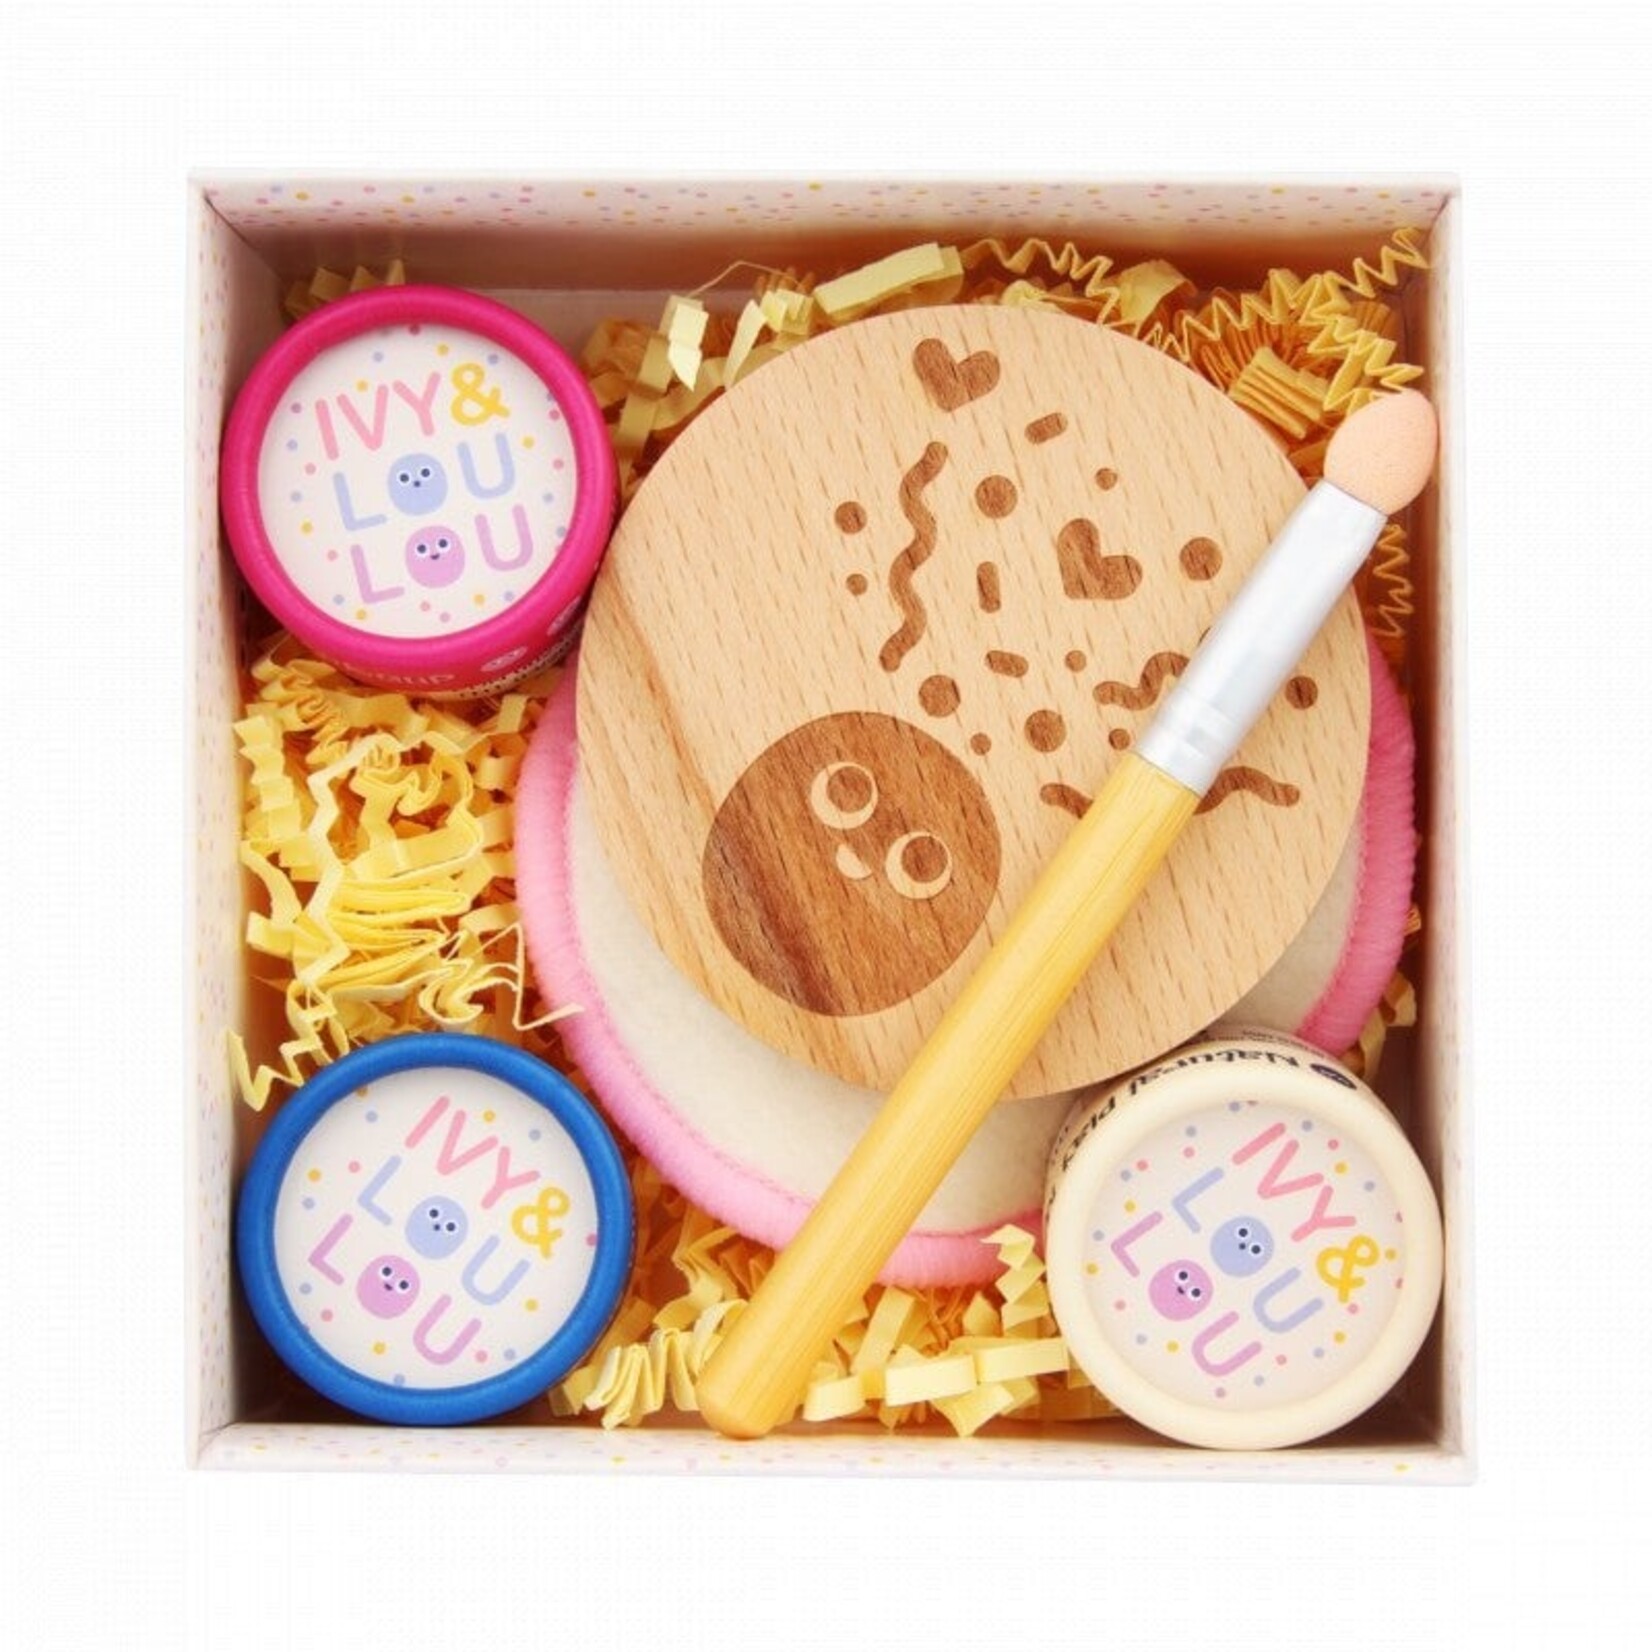 Ivy & Loulou Moonlight Magic Giftset